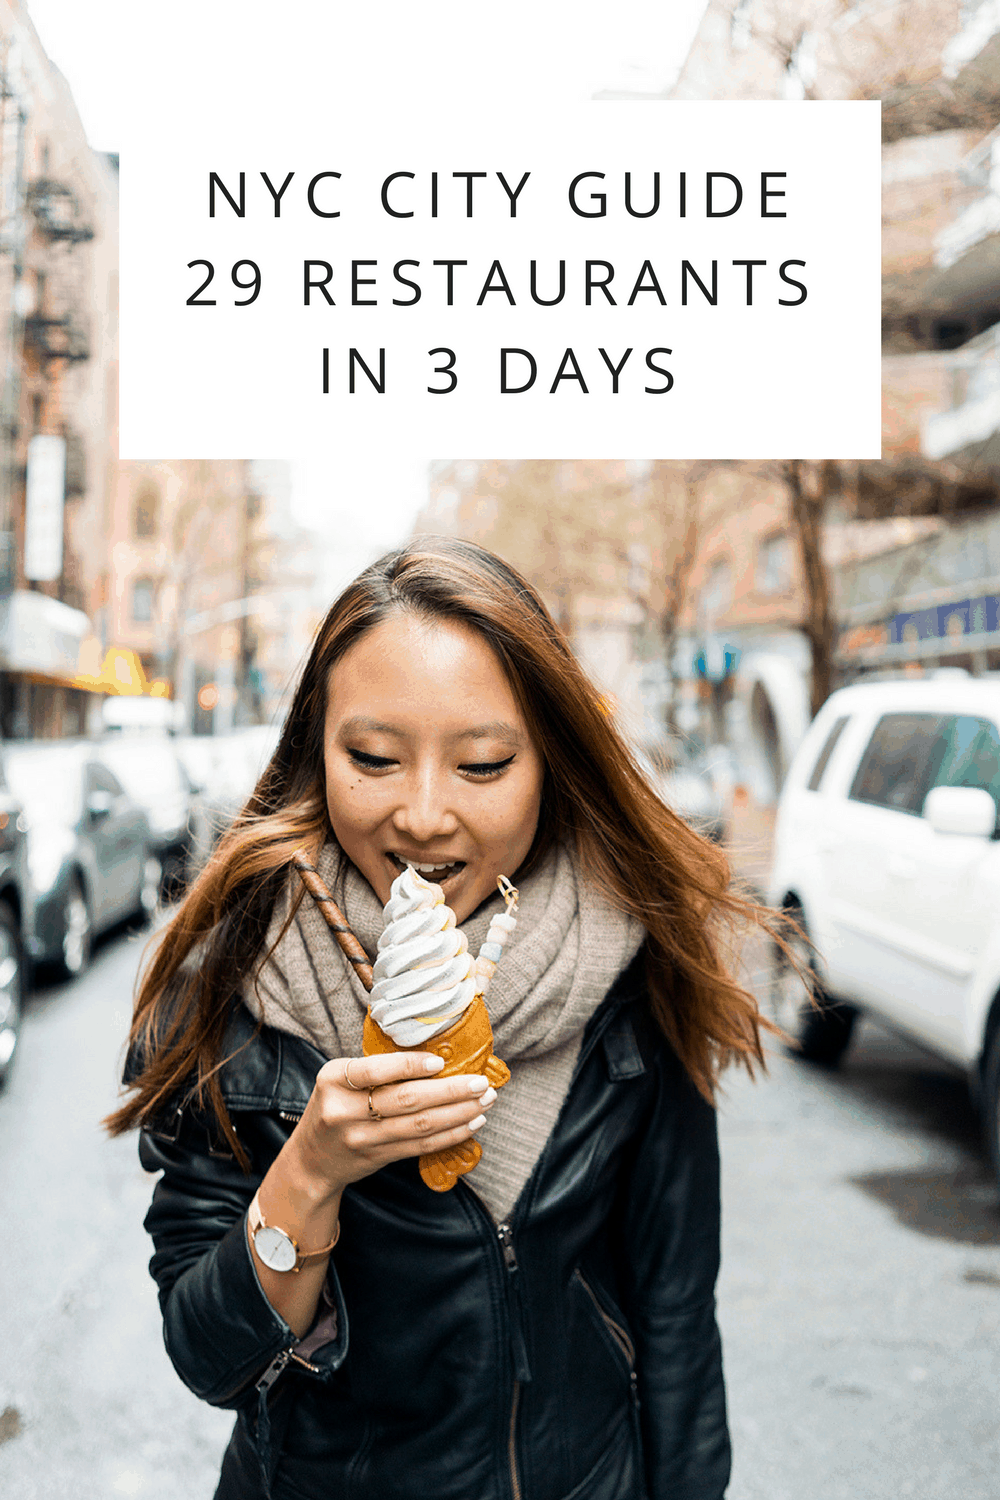 NYC City Guide- 29 Restaurants in 3 Days